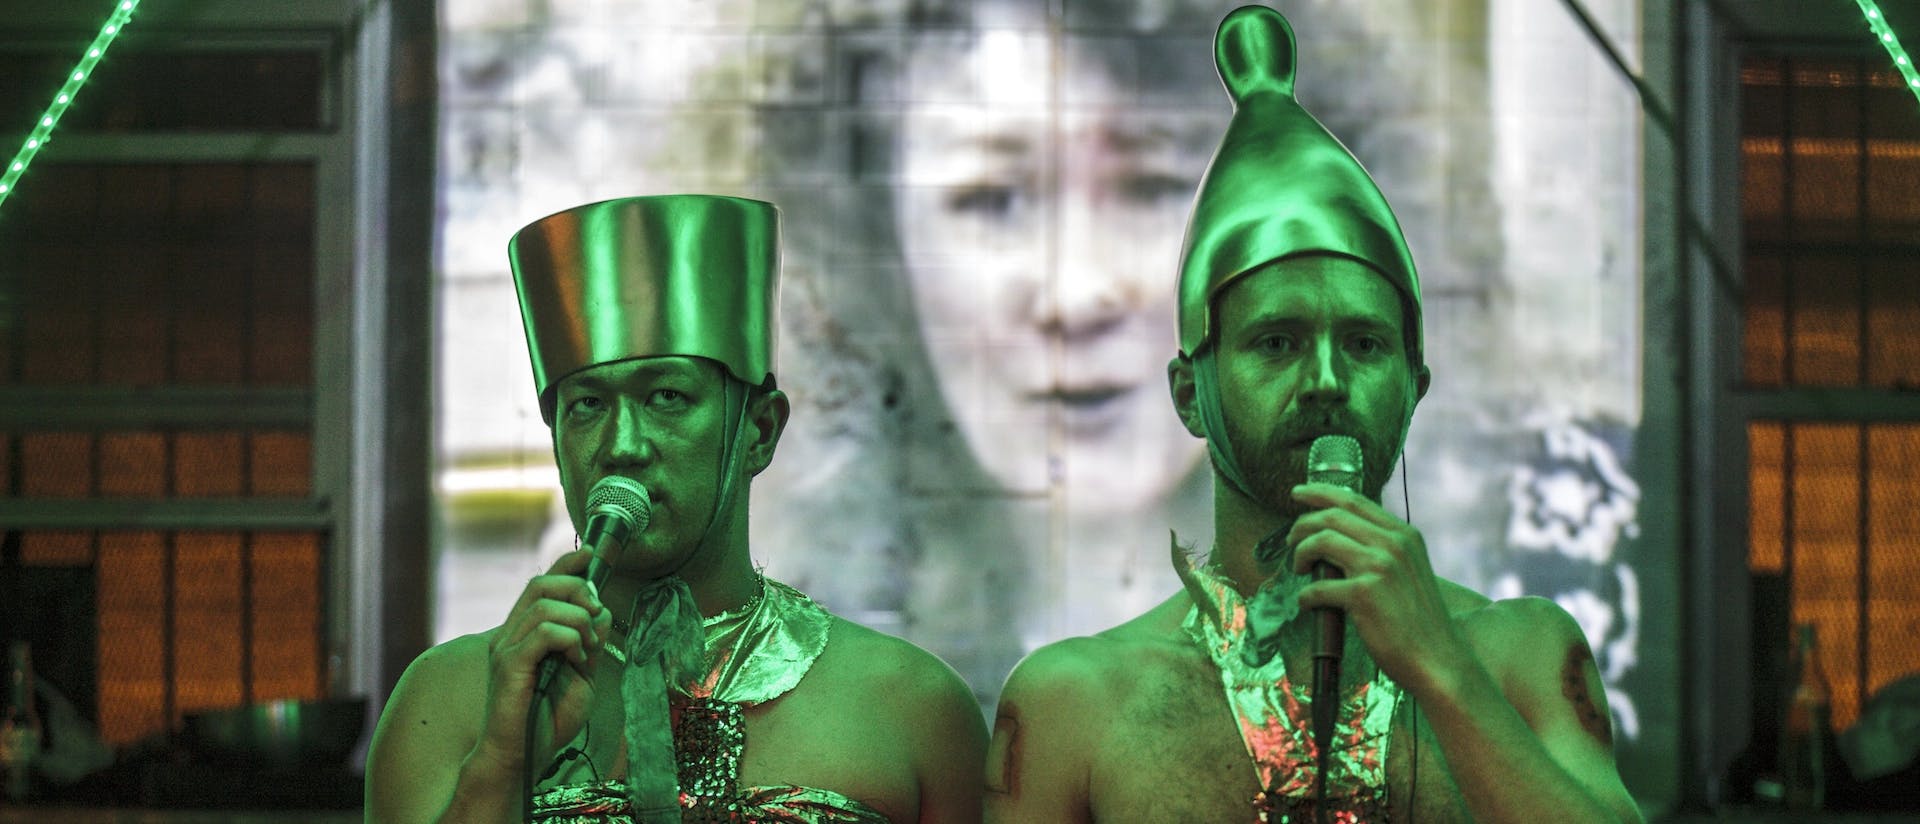 Tei Blow and Sean McElroy stand side by side, vocalizing into microphones and bathed in green light. They stand in sharp focus in front of a projection screen where there is a woman's face displayed out of focus. Both are wearing large golden headpieces and golden halter tops made of metallic, sparkly fabric. Blow's headpiece is flat-topped where McElroy's is tapered and cone-shaped with a rounded tip. 